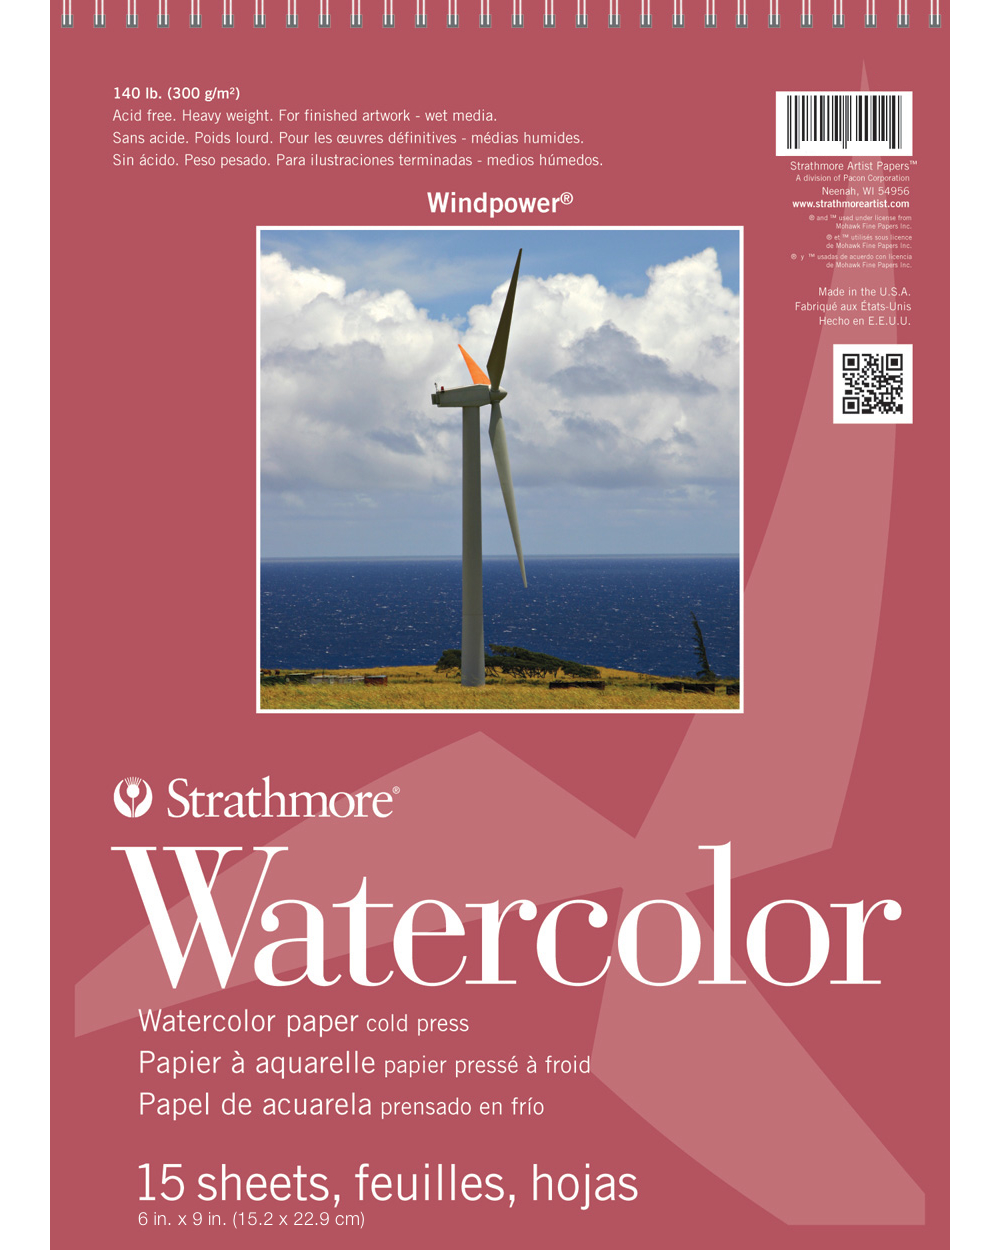 Strathmore Windpower Watercolor Pad. The Strathmore Windpower Watercolor Pad